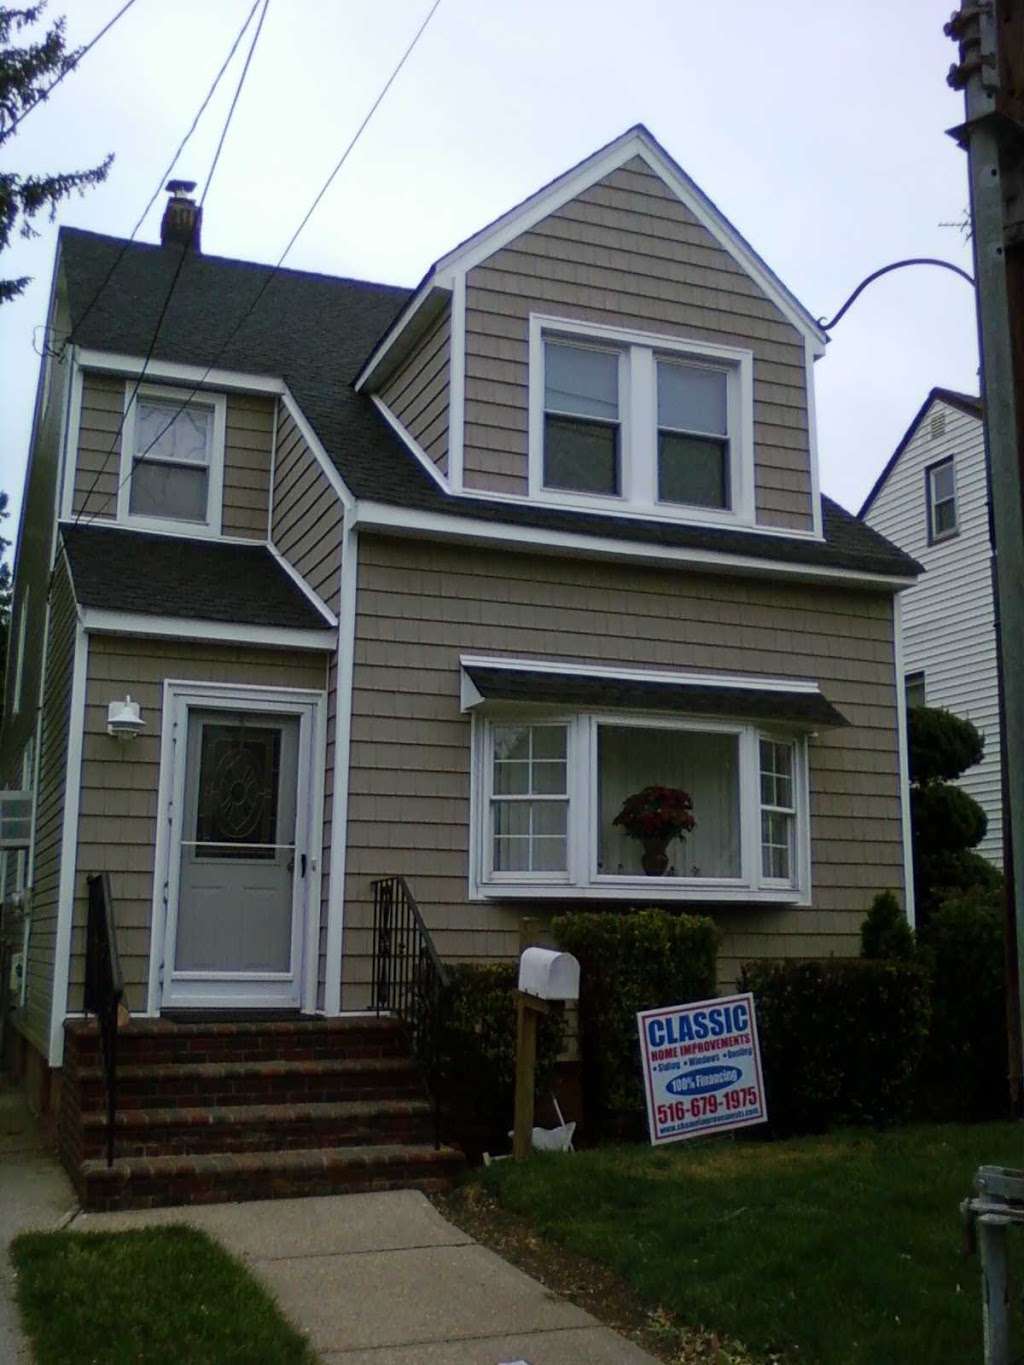 Classic Home Improvements | 1839 Bellmore Ave, Bellmore, NY 11710 | Phone: (516) 679-1975